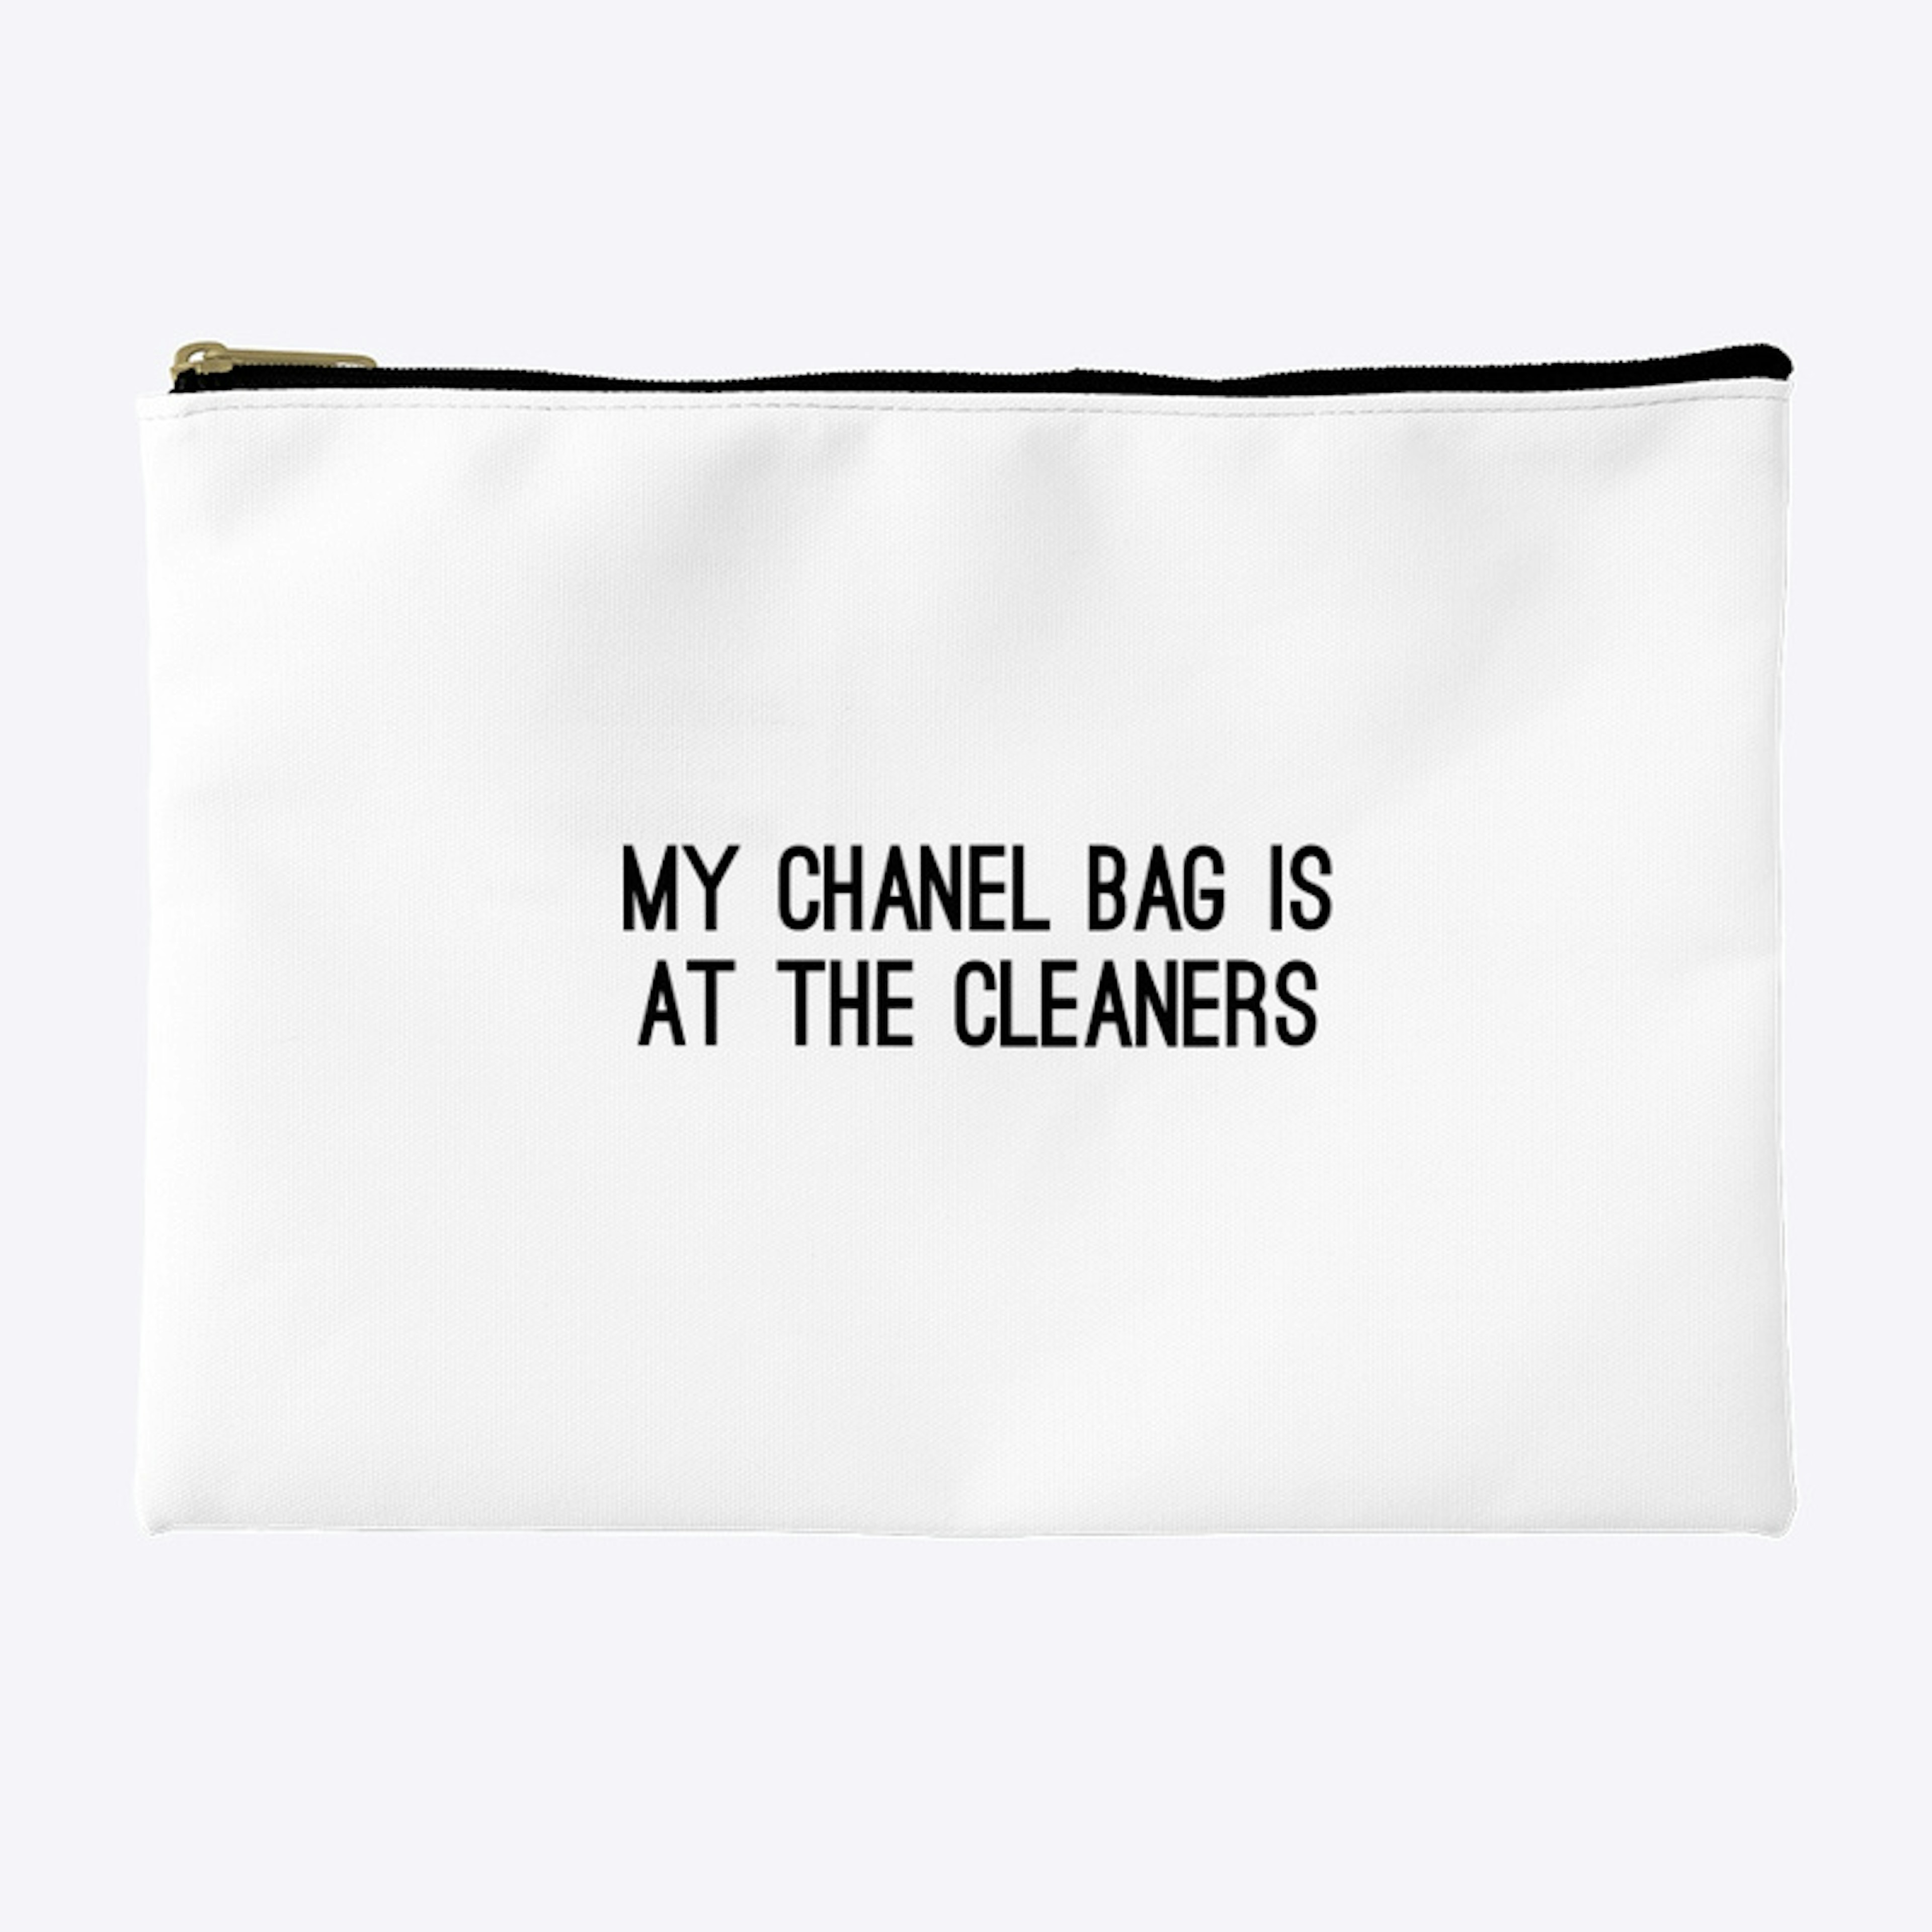 At the cleaners pouch